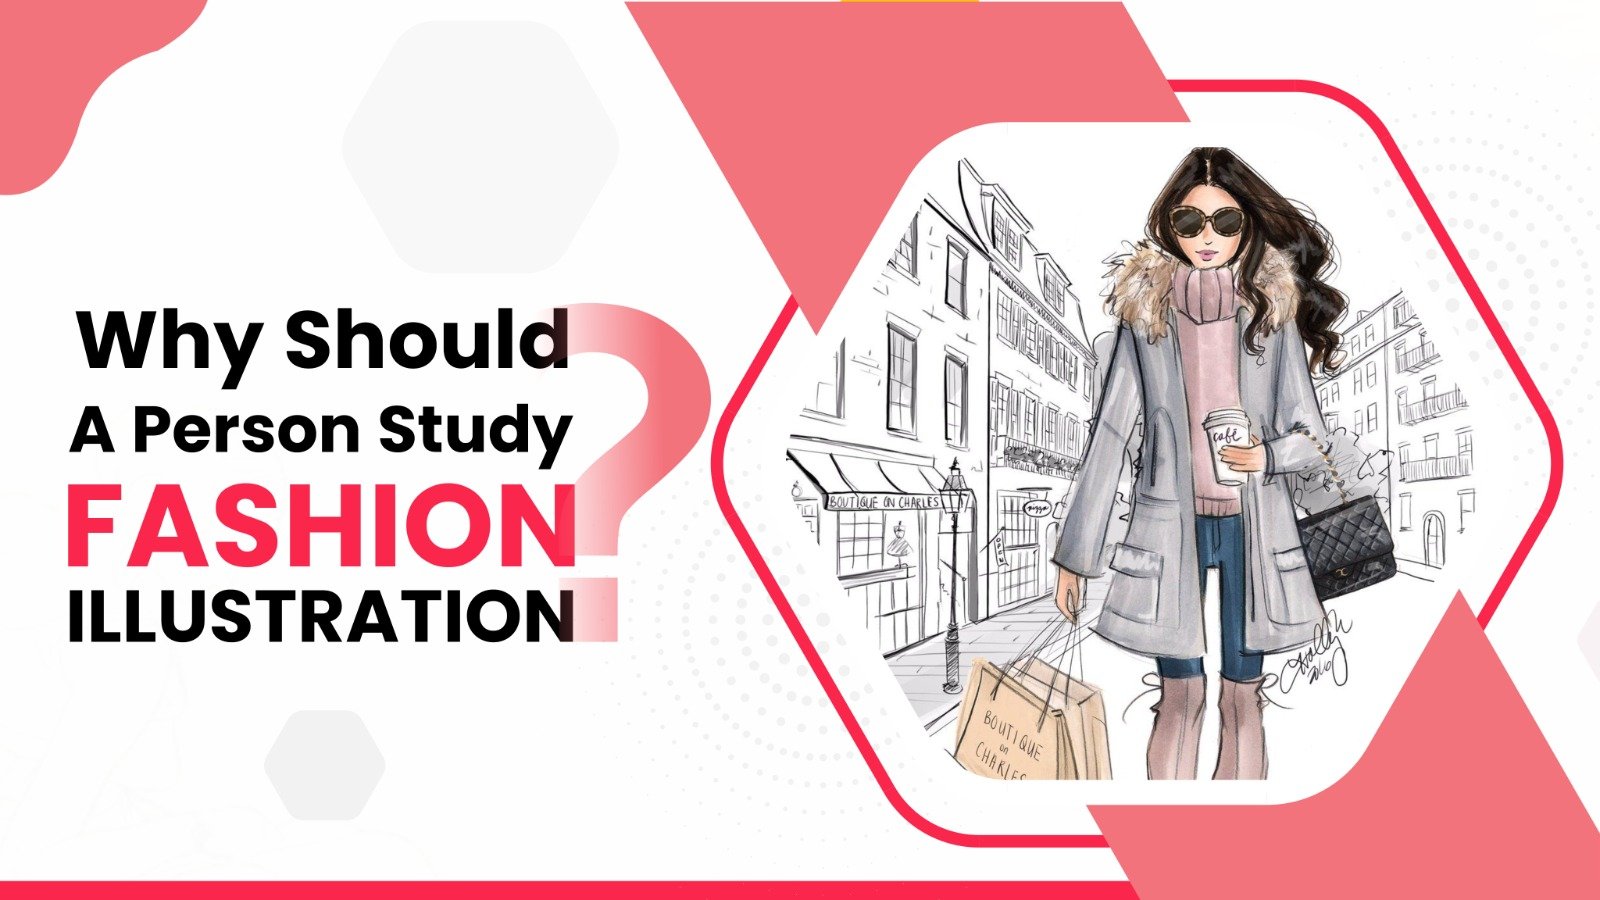 Why Should a Person Study Fashion Illustration?